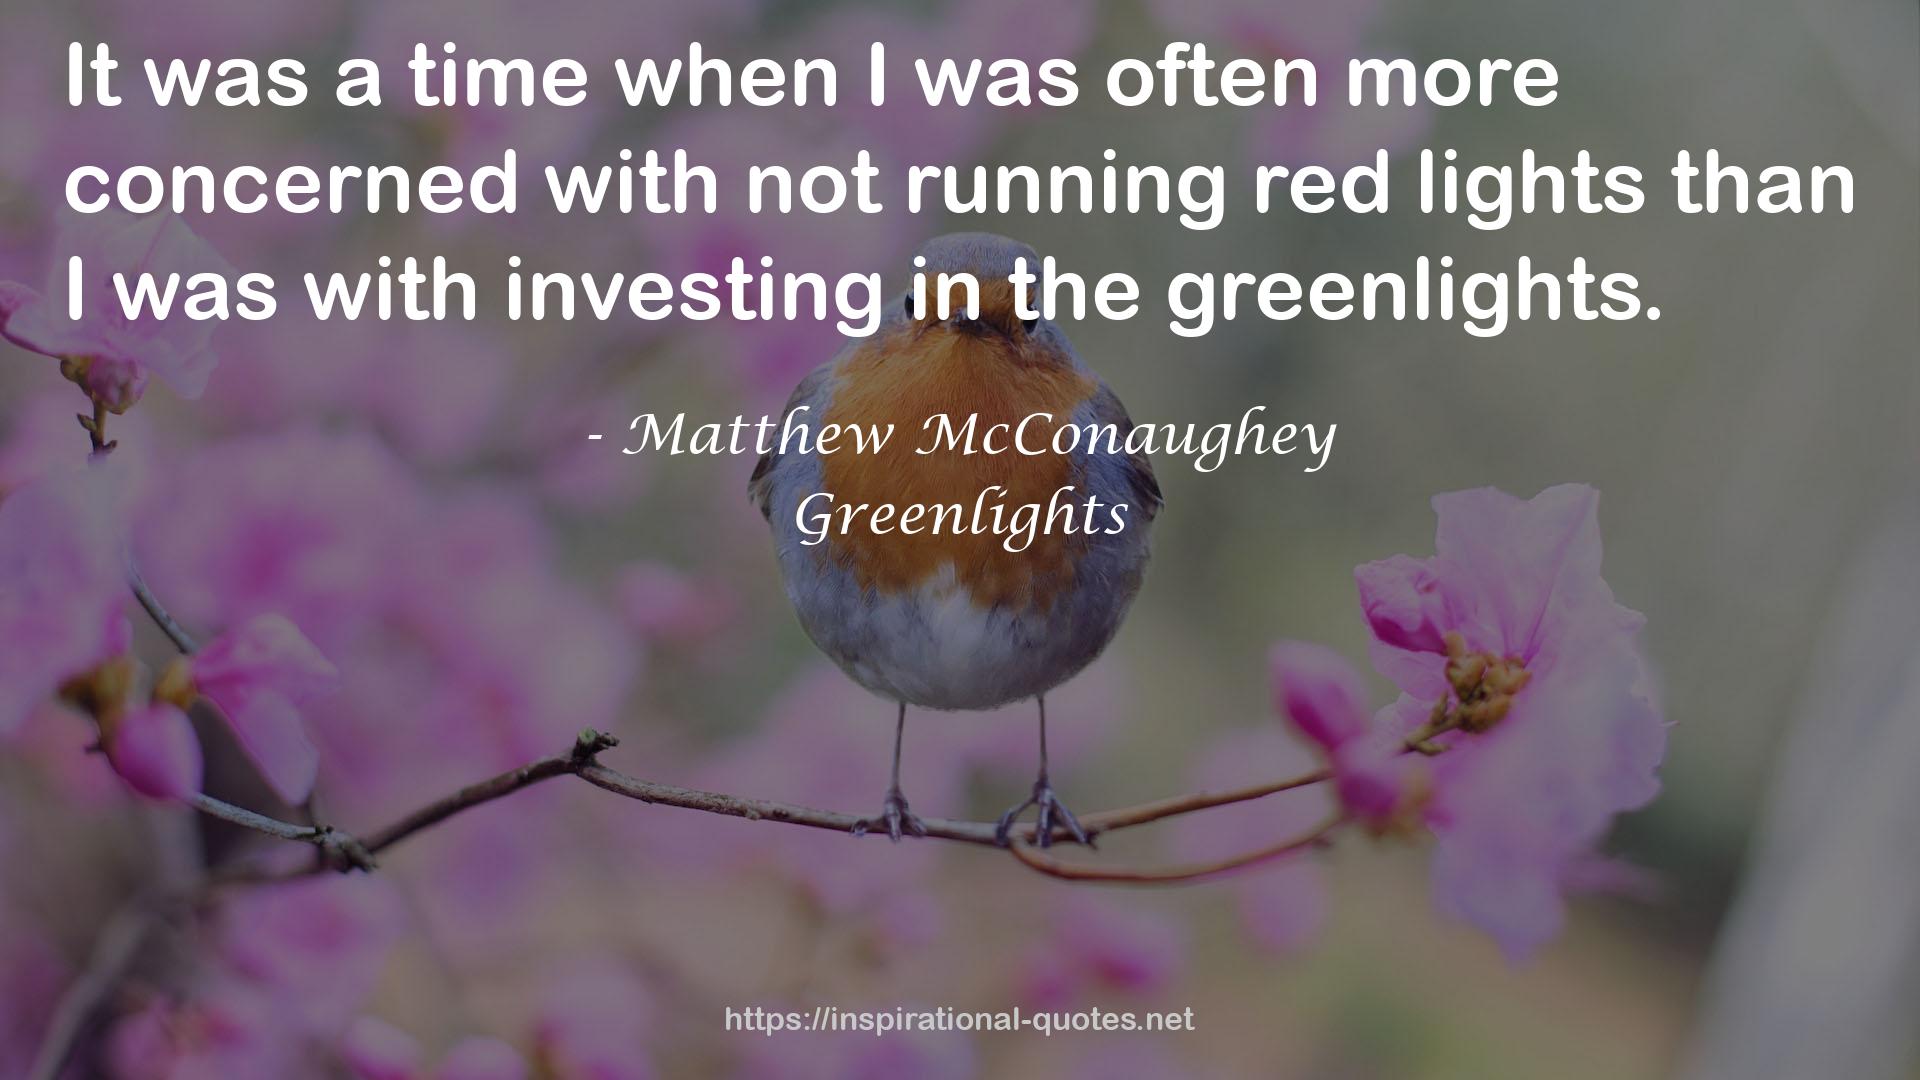 Greenlights QUOTES